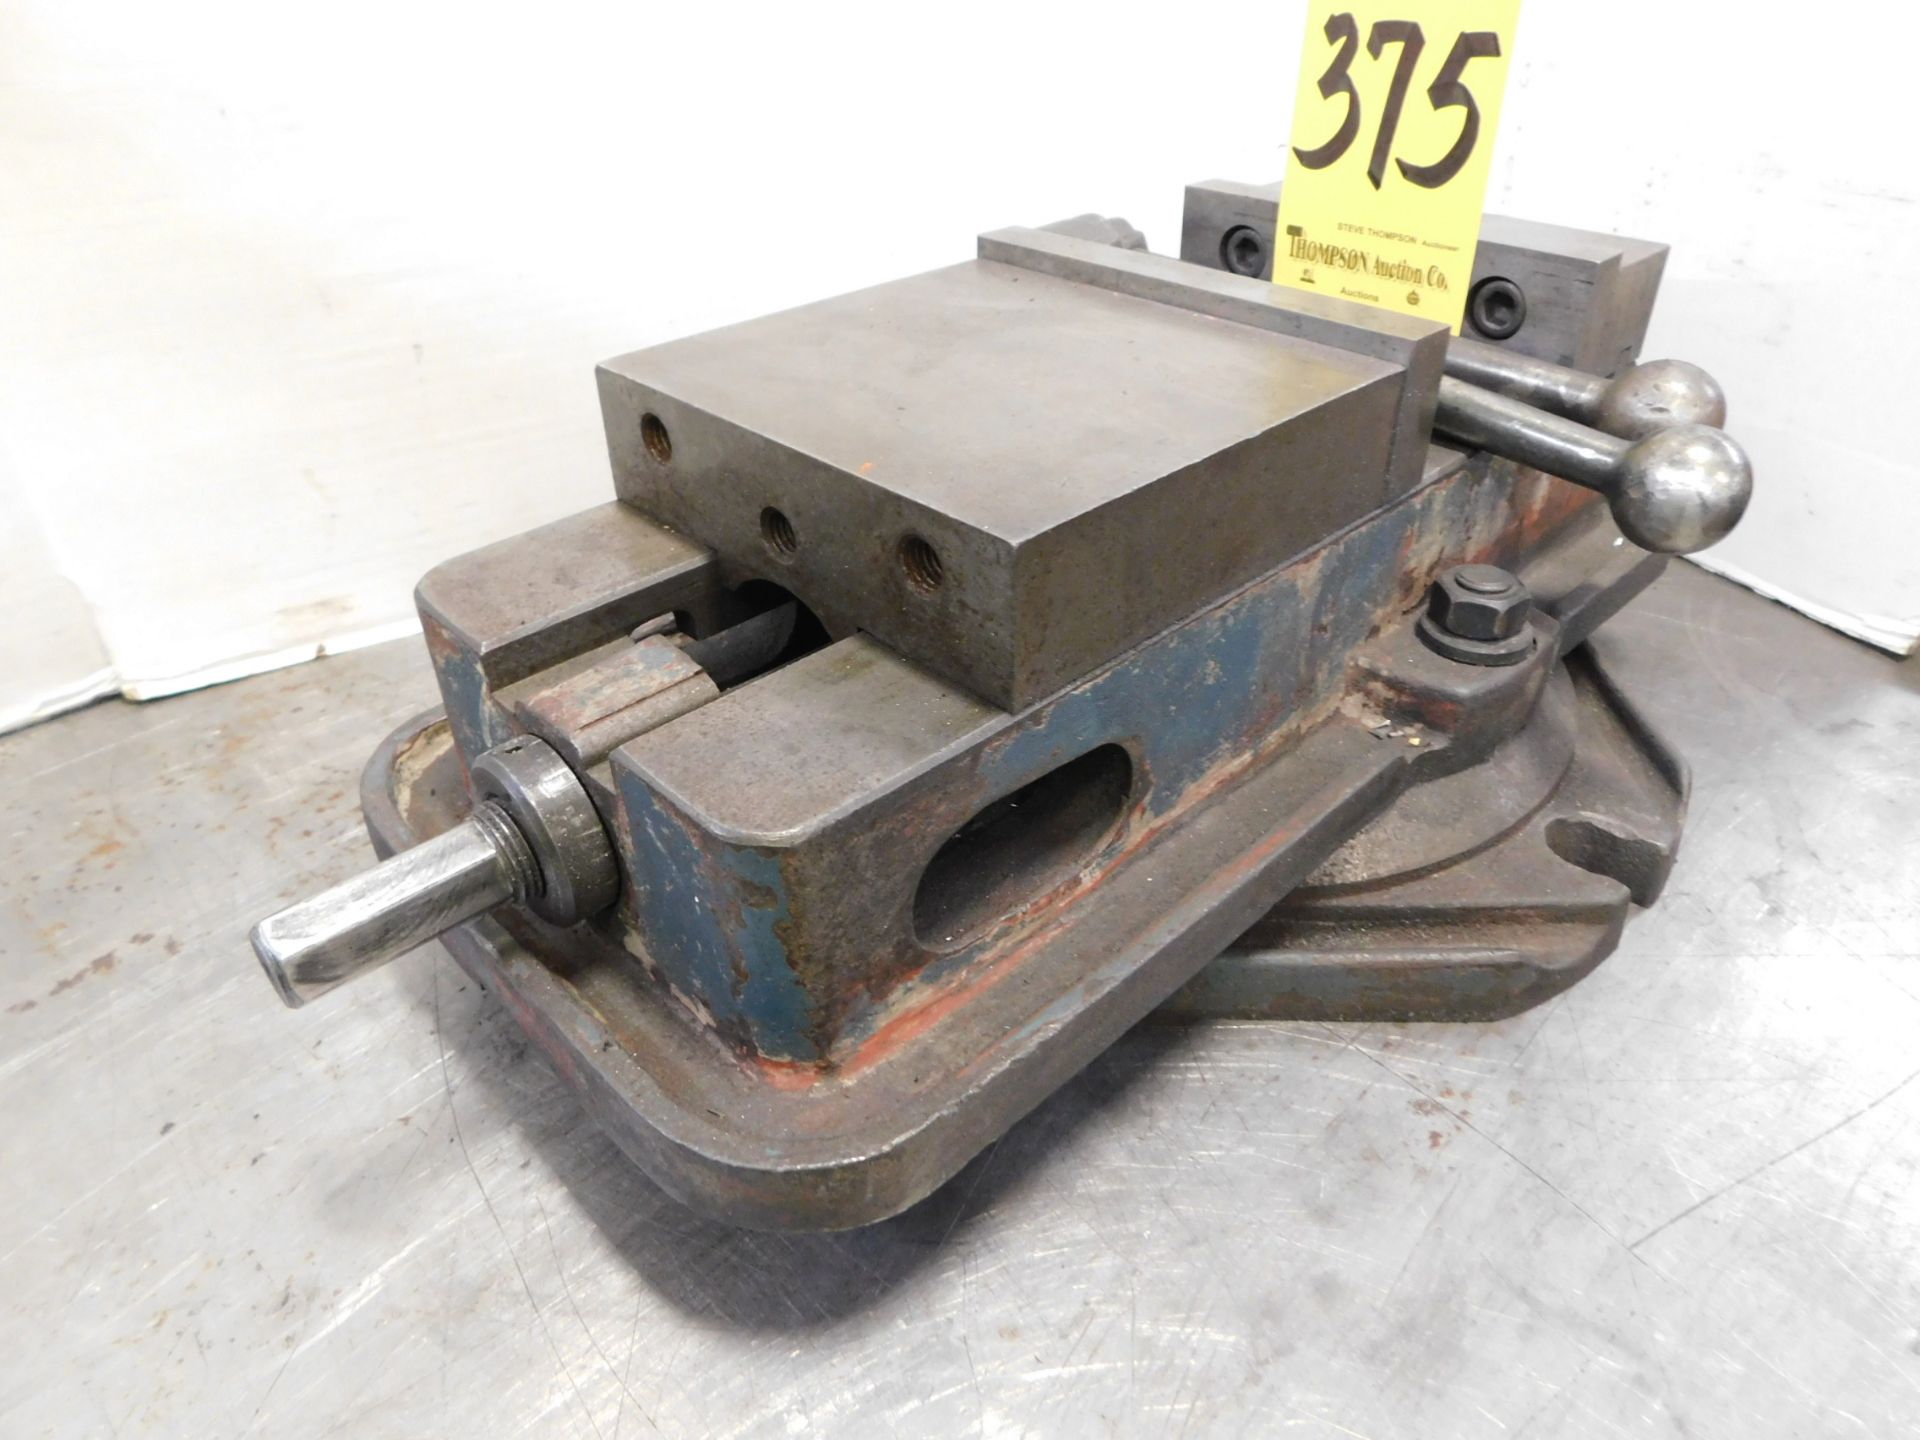 6" Mill Vise with Swivel Base